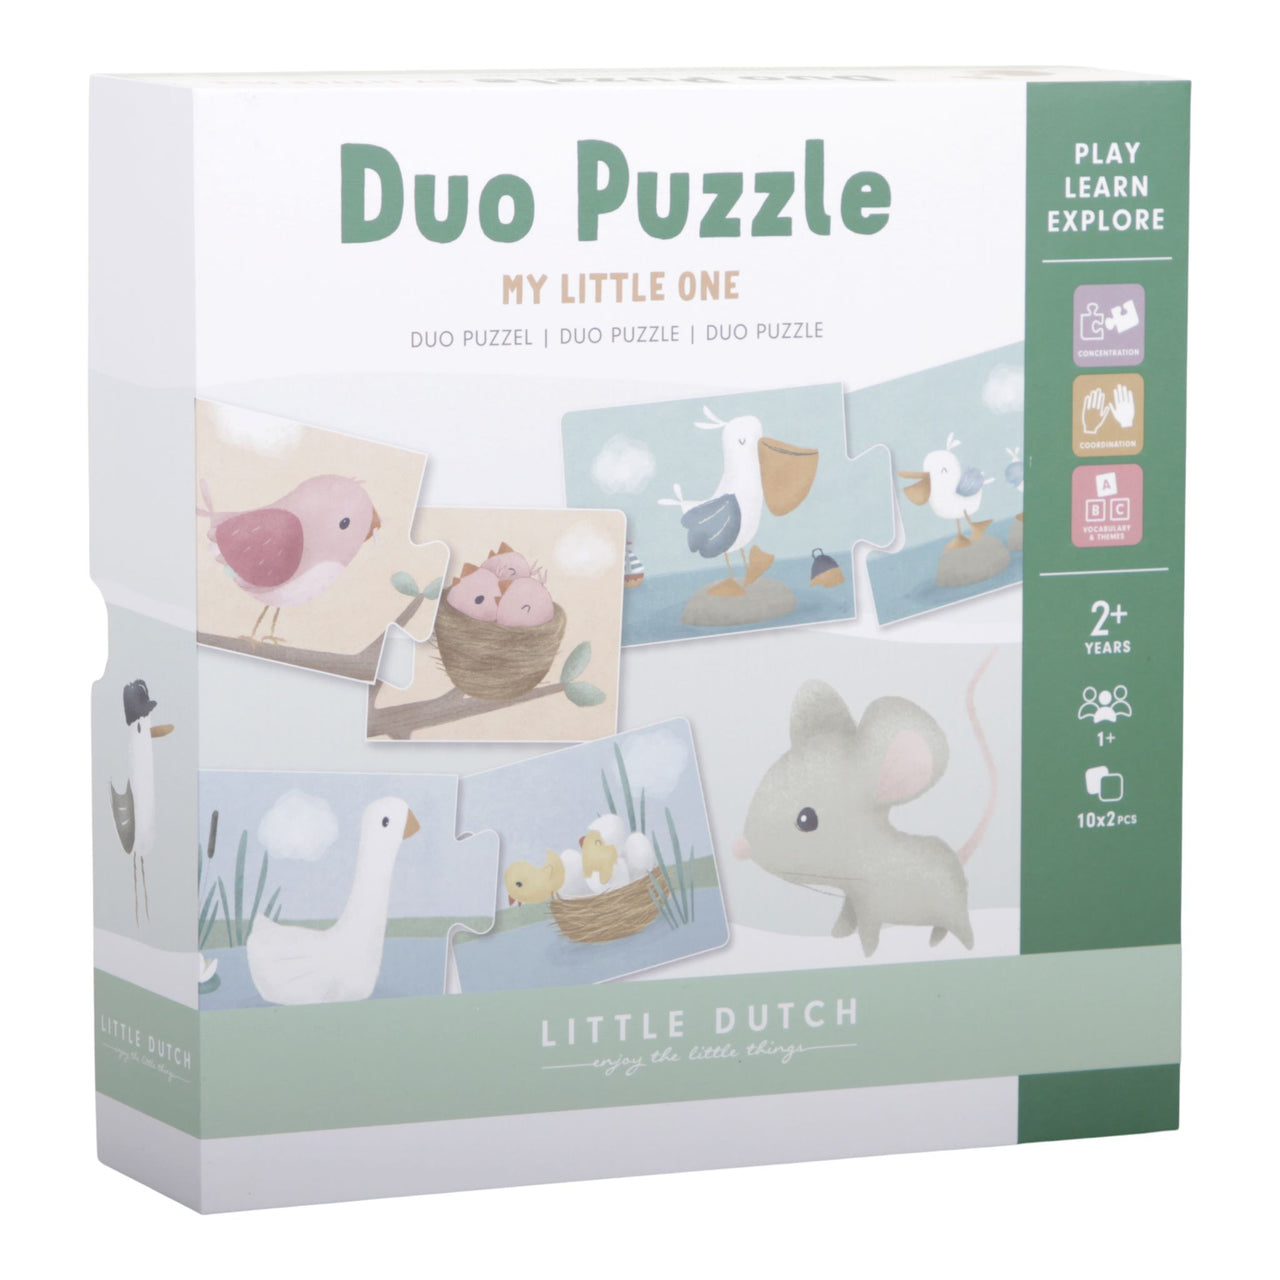 This cute Duo Puzzle features our beautifull illustrations of animals and their little ones on cardboard puzzle pieces. A perfect size for your little one! There are 10 matches to be made to assist your child’s development of concentration and coordination. Have fun making the puzzles together!